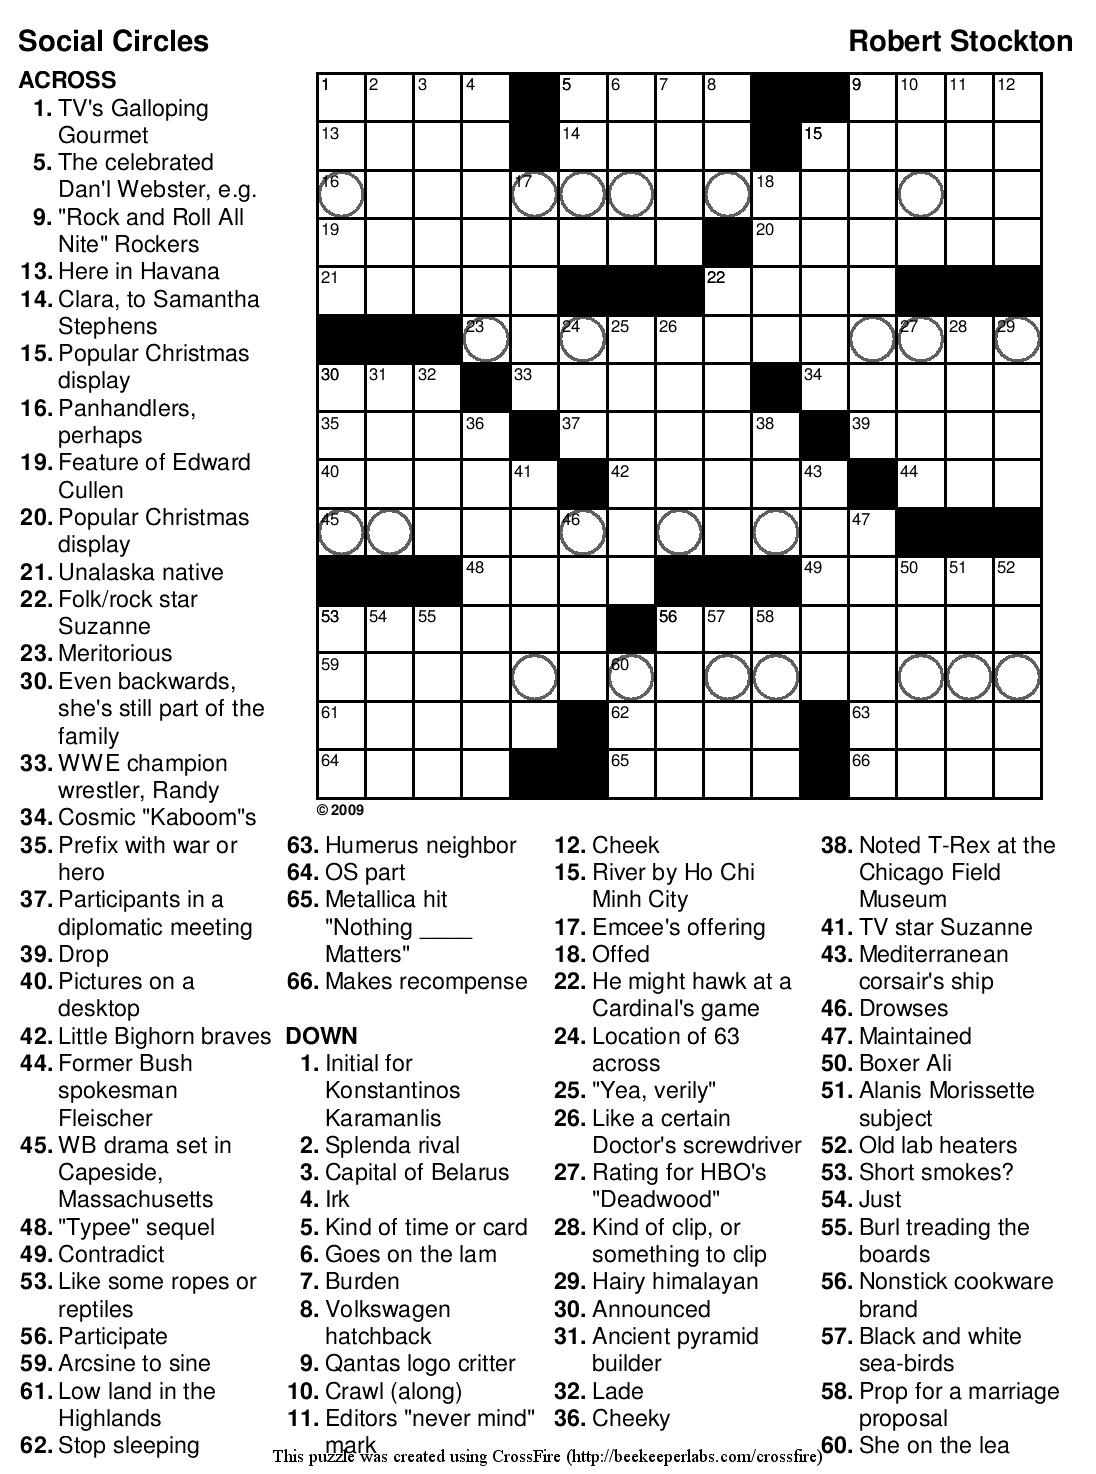 Crossword Puzzles Printable - Yahoo Image Search Results | Crossword - You Magazine Printable Crossword Puzzles